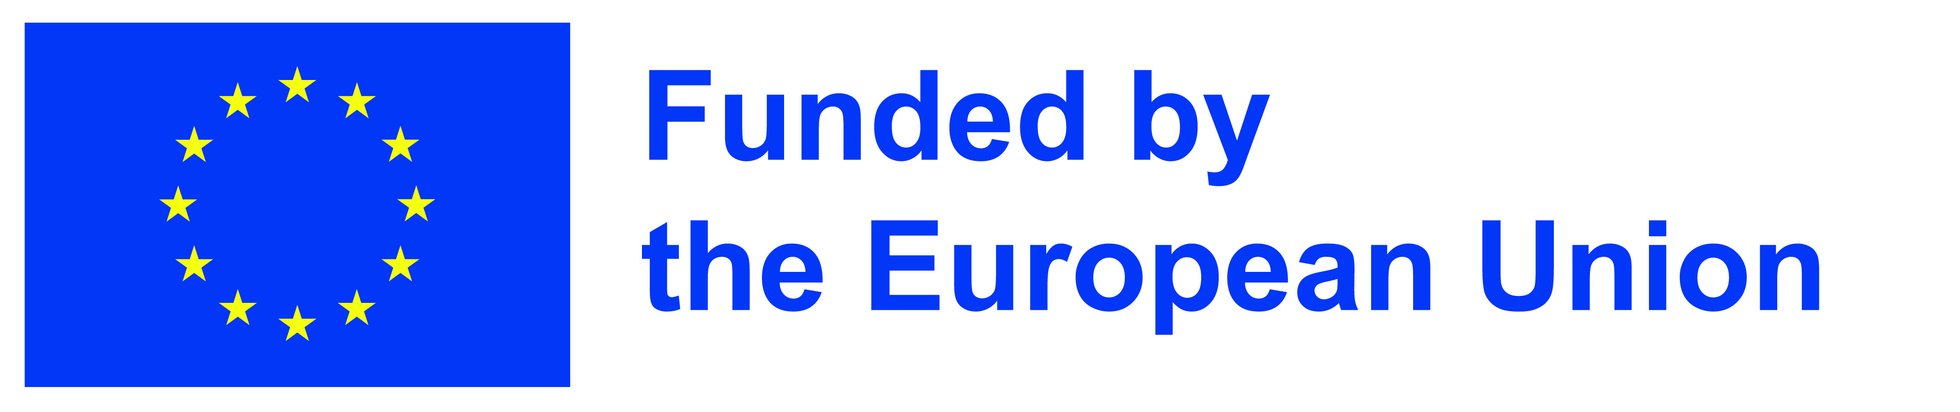 LOGO Funded by EU